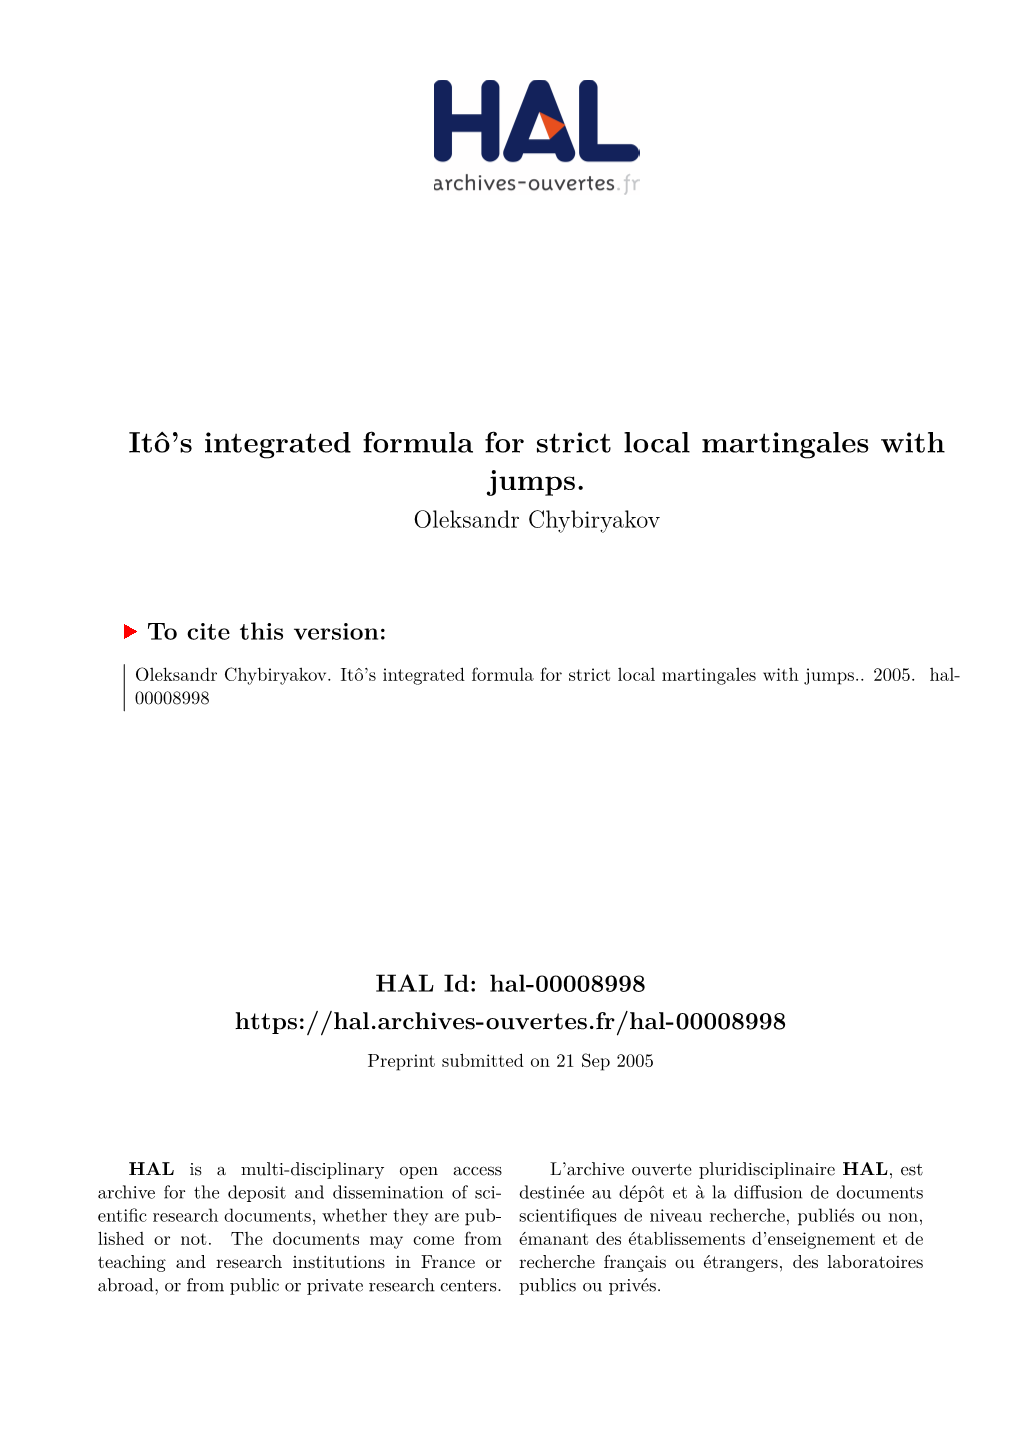 Itô's Integrated Formula for Strict Local Martingales with Jumps